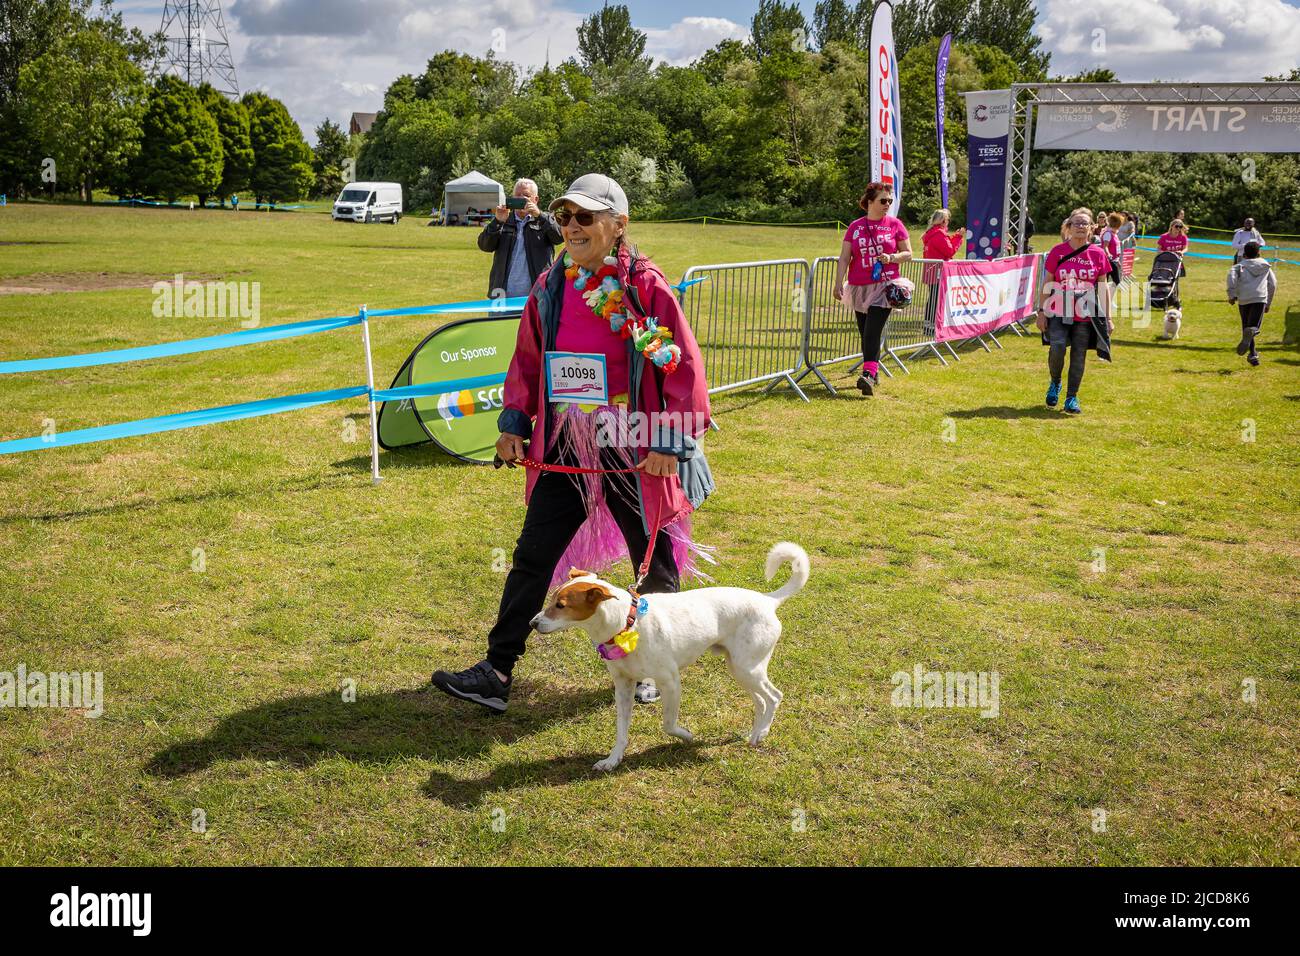 12 June 2022; Warrington Cheshire, UK; Race for Life in Victoria Park in aid of Cancer Research. The race begins for those walking the course Credit: John Hopkins/Alamy Live News Stock Photo